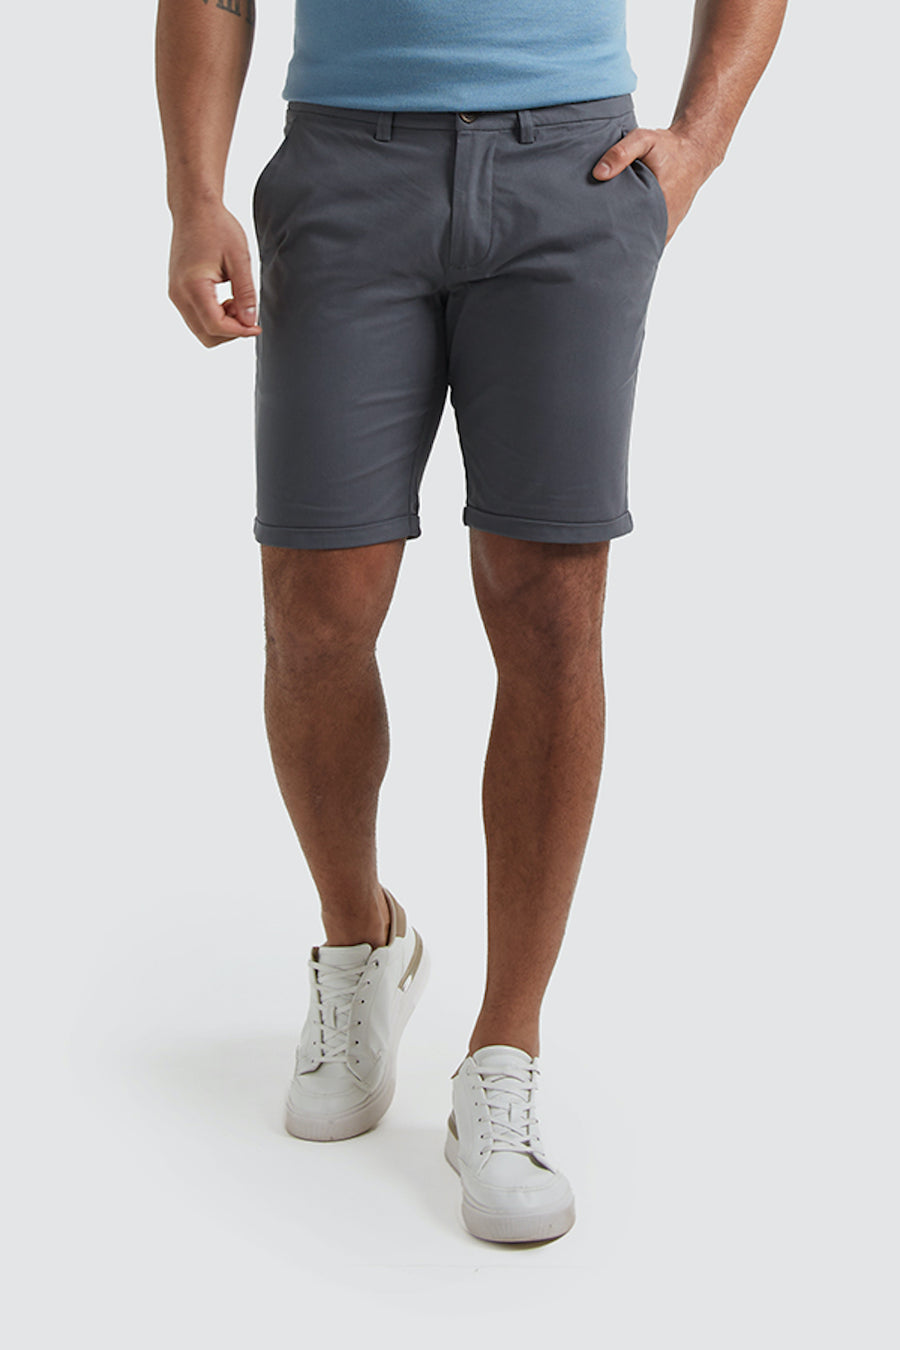 Athletic Fit Chino Shorts in Grey - TAILORED ATHLETE - USA